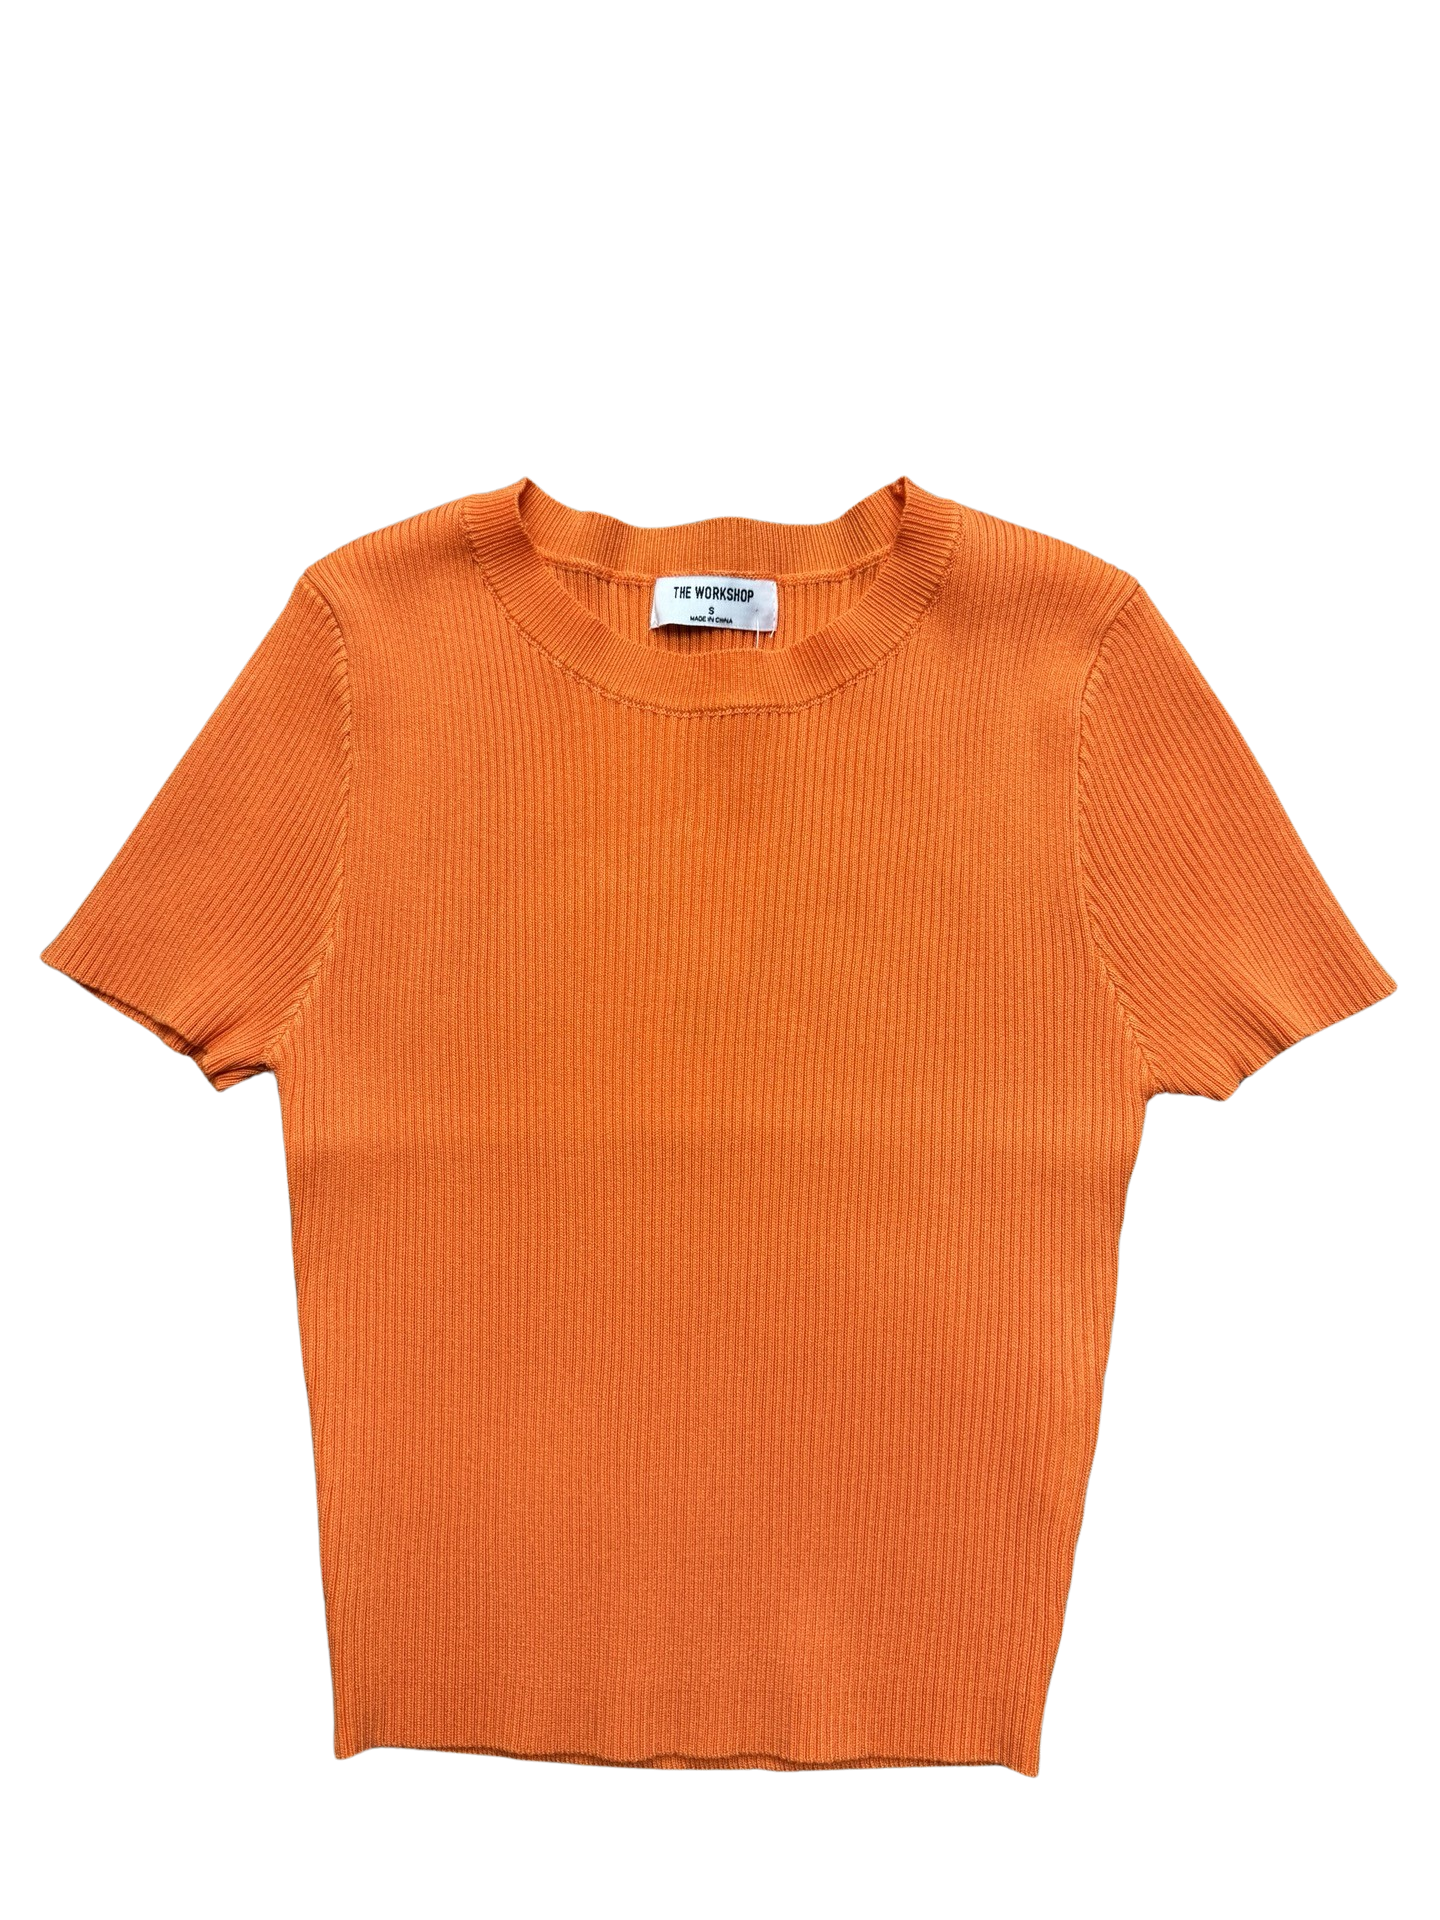 Apparel- The Workshop Scoop Neck Ribbed Fitted Tee